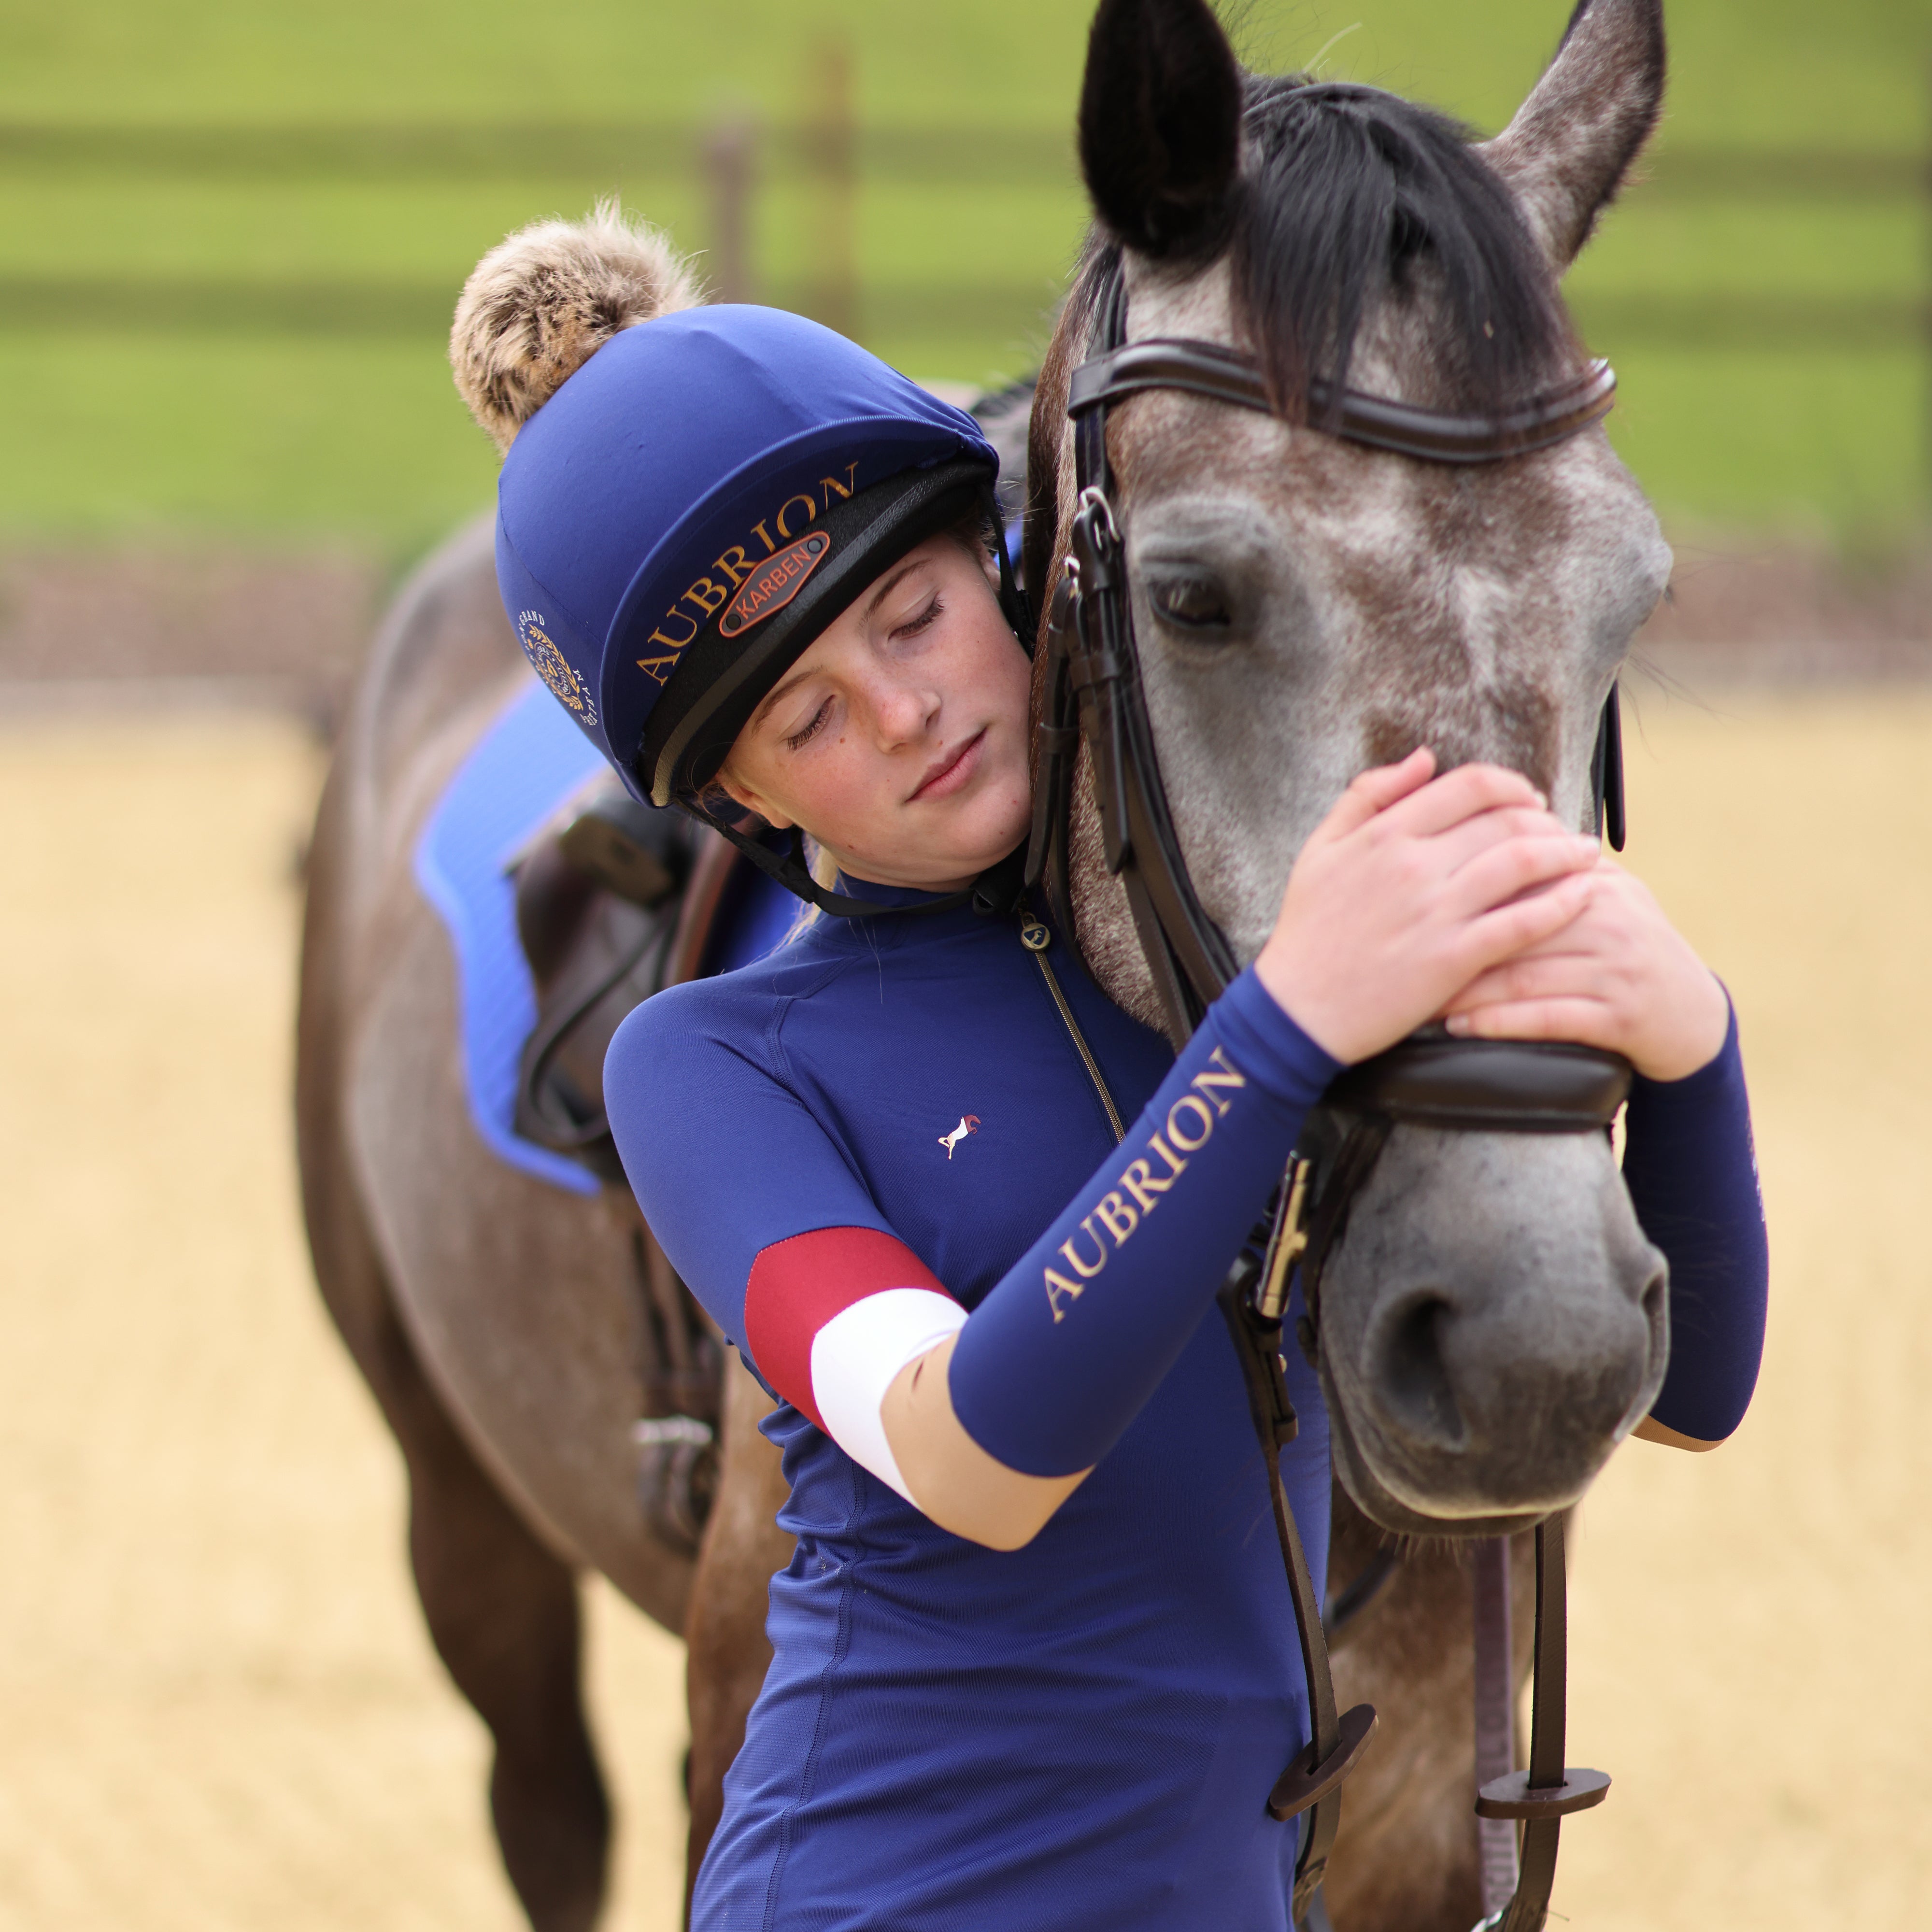 Shires Young Rider Aubrion Team Long Sleeve Base Layer